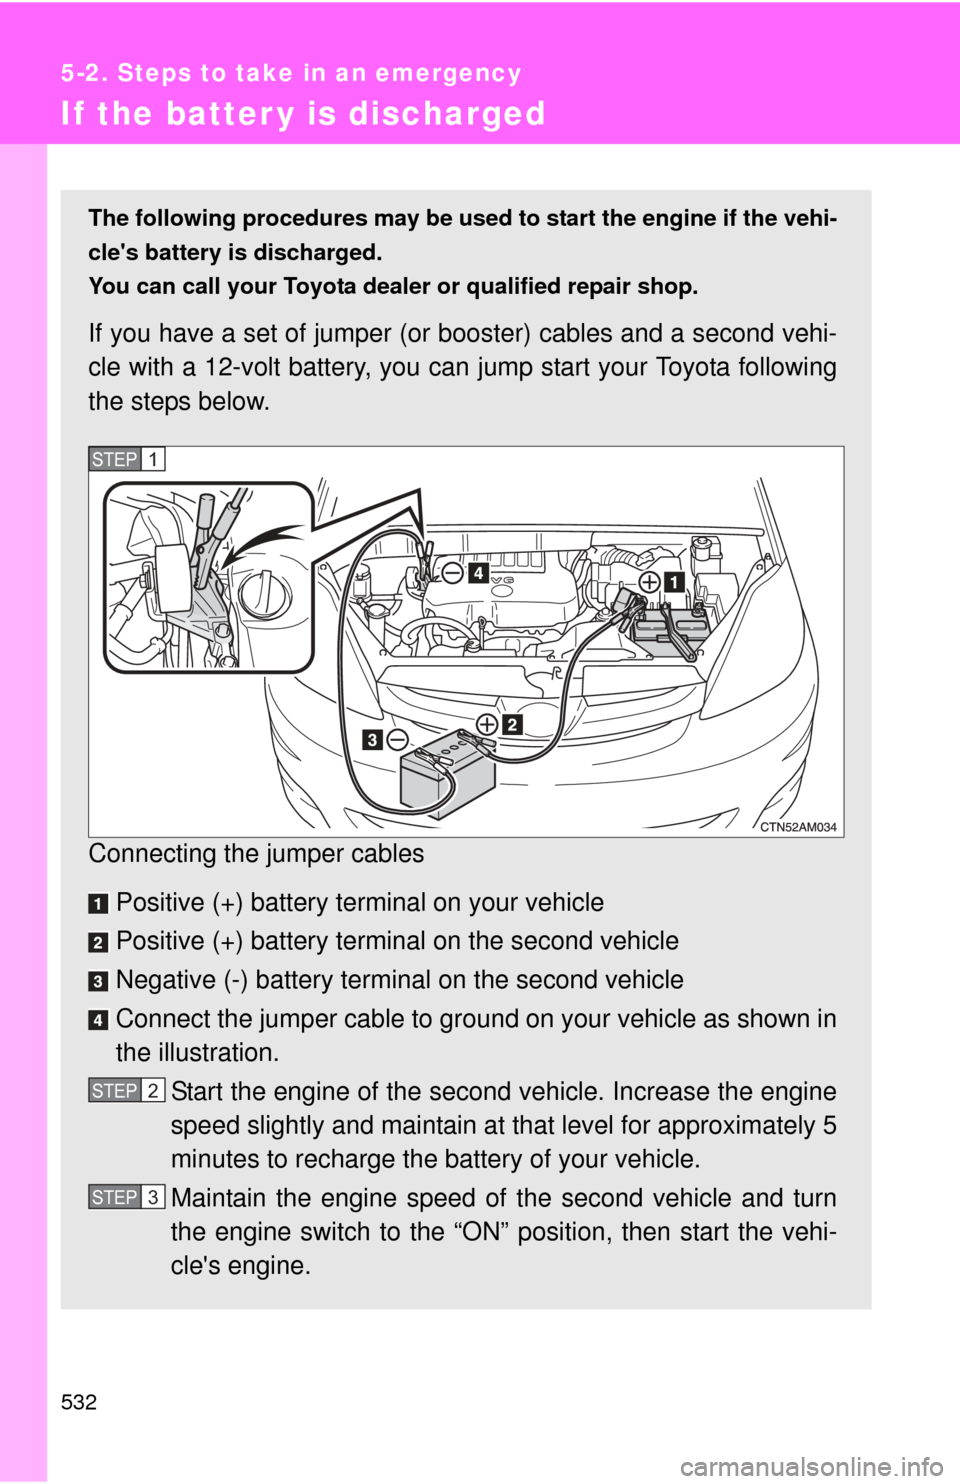 TOYOTA SIENNA 2010 XL30 / 3.G Owners Manual 532
5-2. Steps to take in an emergency
If the batter y is discharged
The following procedures may be used to start the engine if the vehi-
cles battery is discharged.
You can call your Toyota dealer 